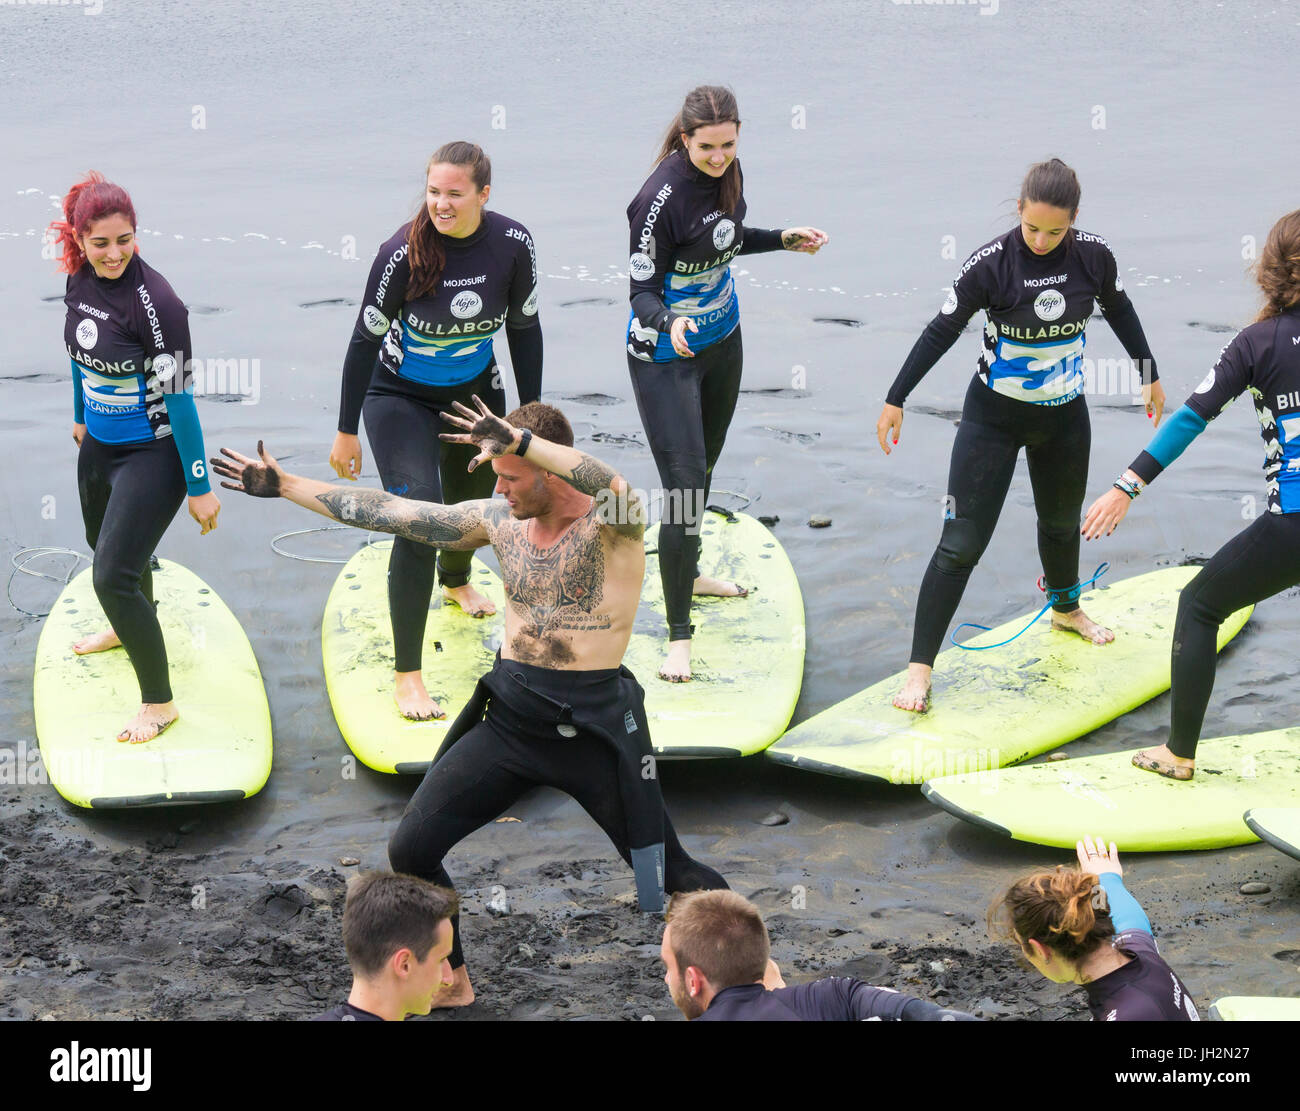 Las Palmas, Gran Canaria, Canary Islands, Spain. 12th July 2017. Weather: A busy afternoon at one of the many surf schools on the city beach in Las Palmas as locals head to the beaches for the long summer holidays. Credit: ALAN DAWSON/Alamy Live News Stock Photo